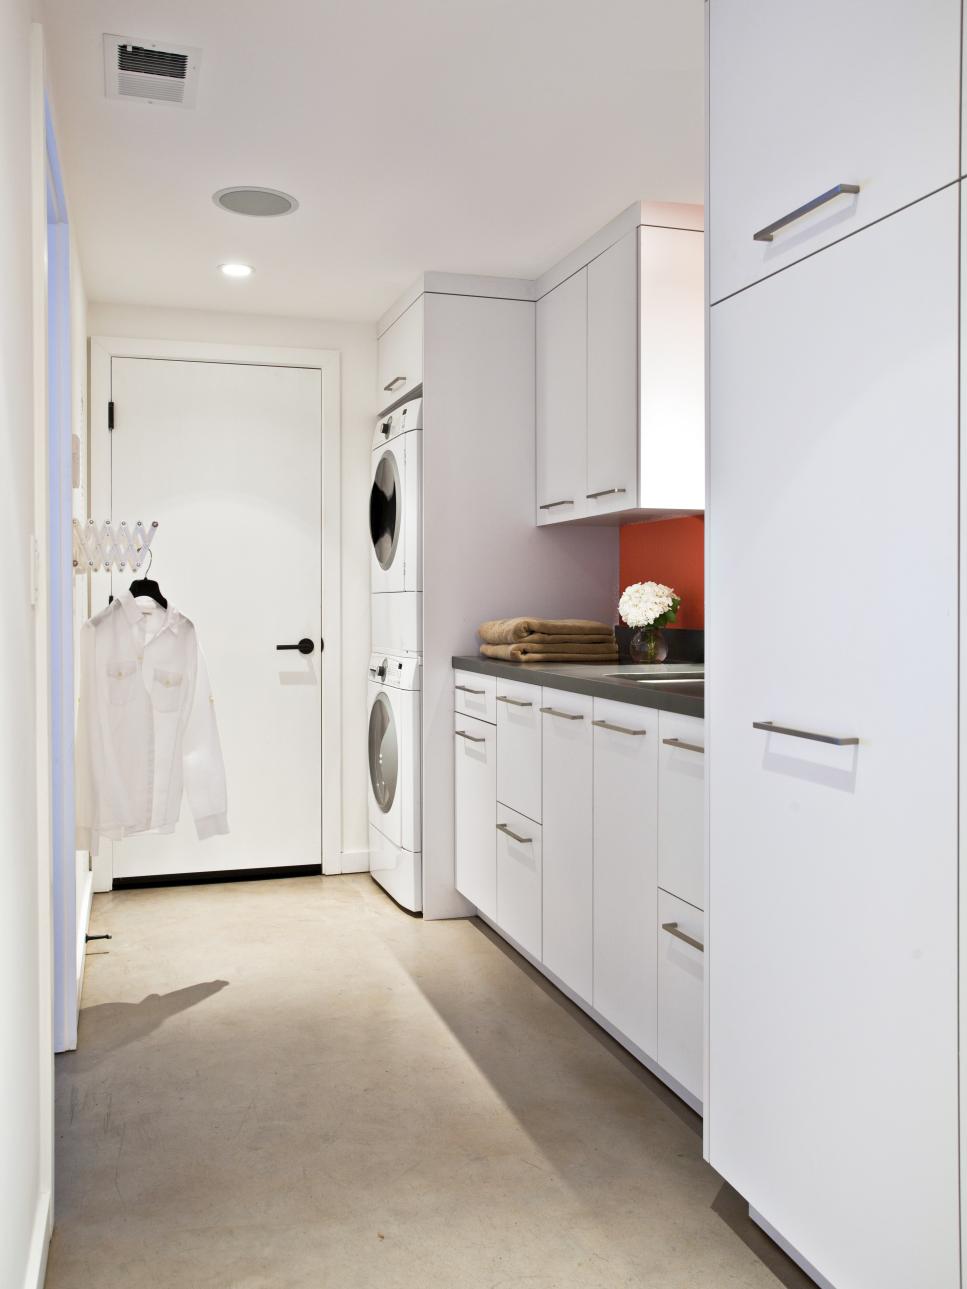 Laundry Room With Stacked Washer and Dryer 